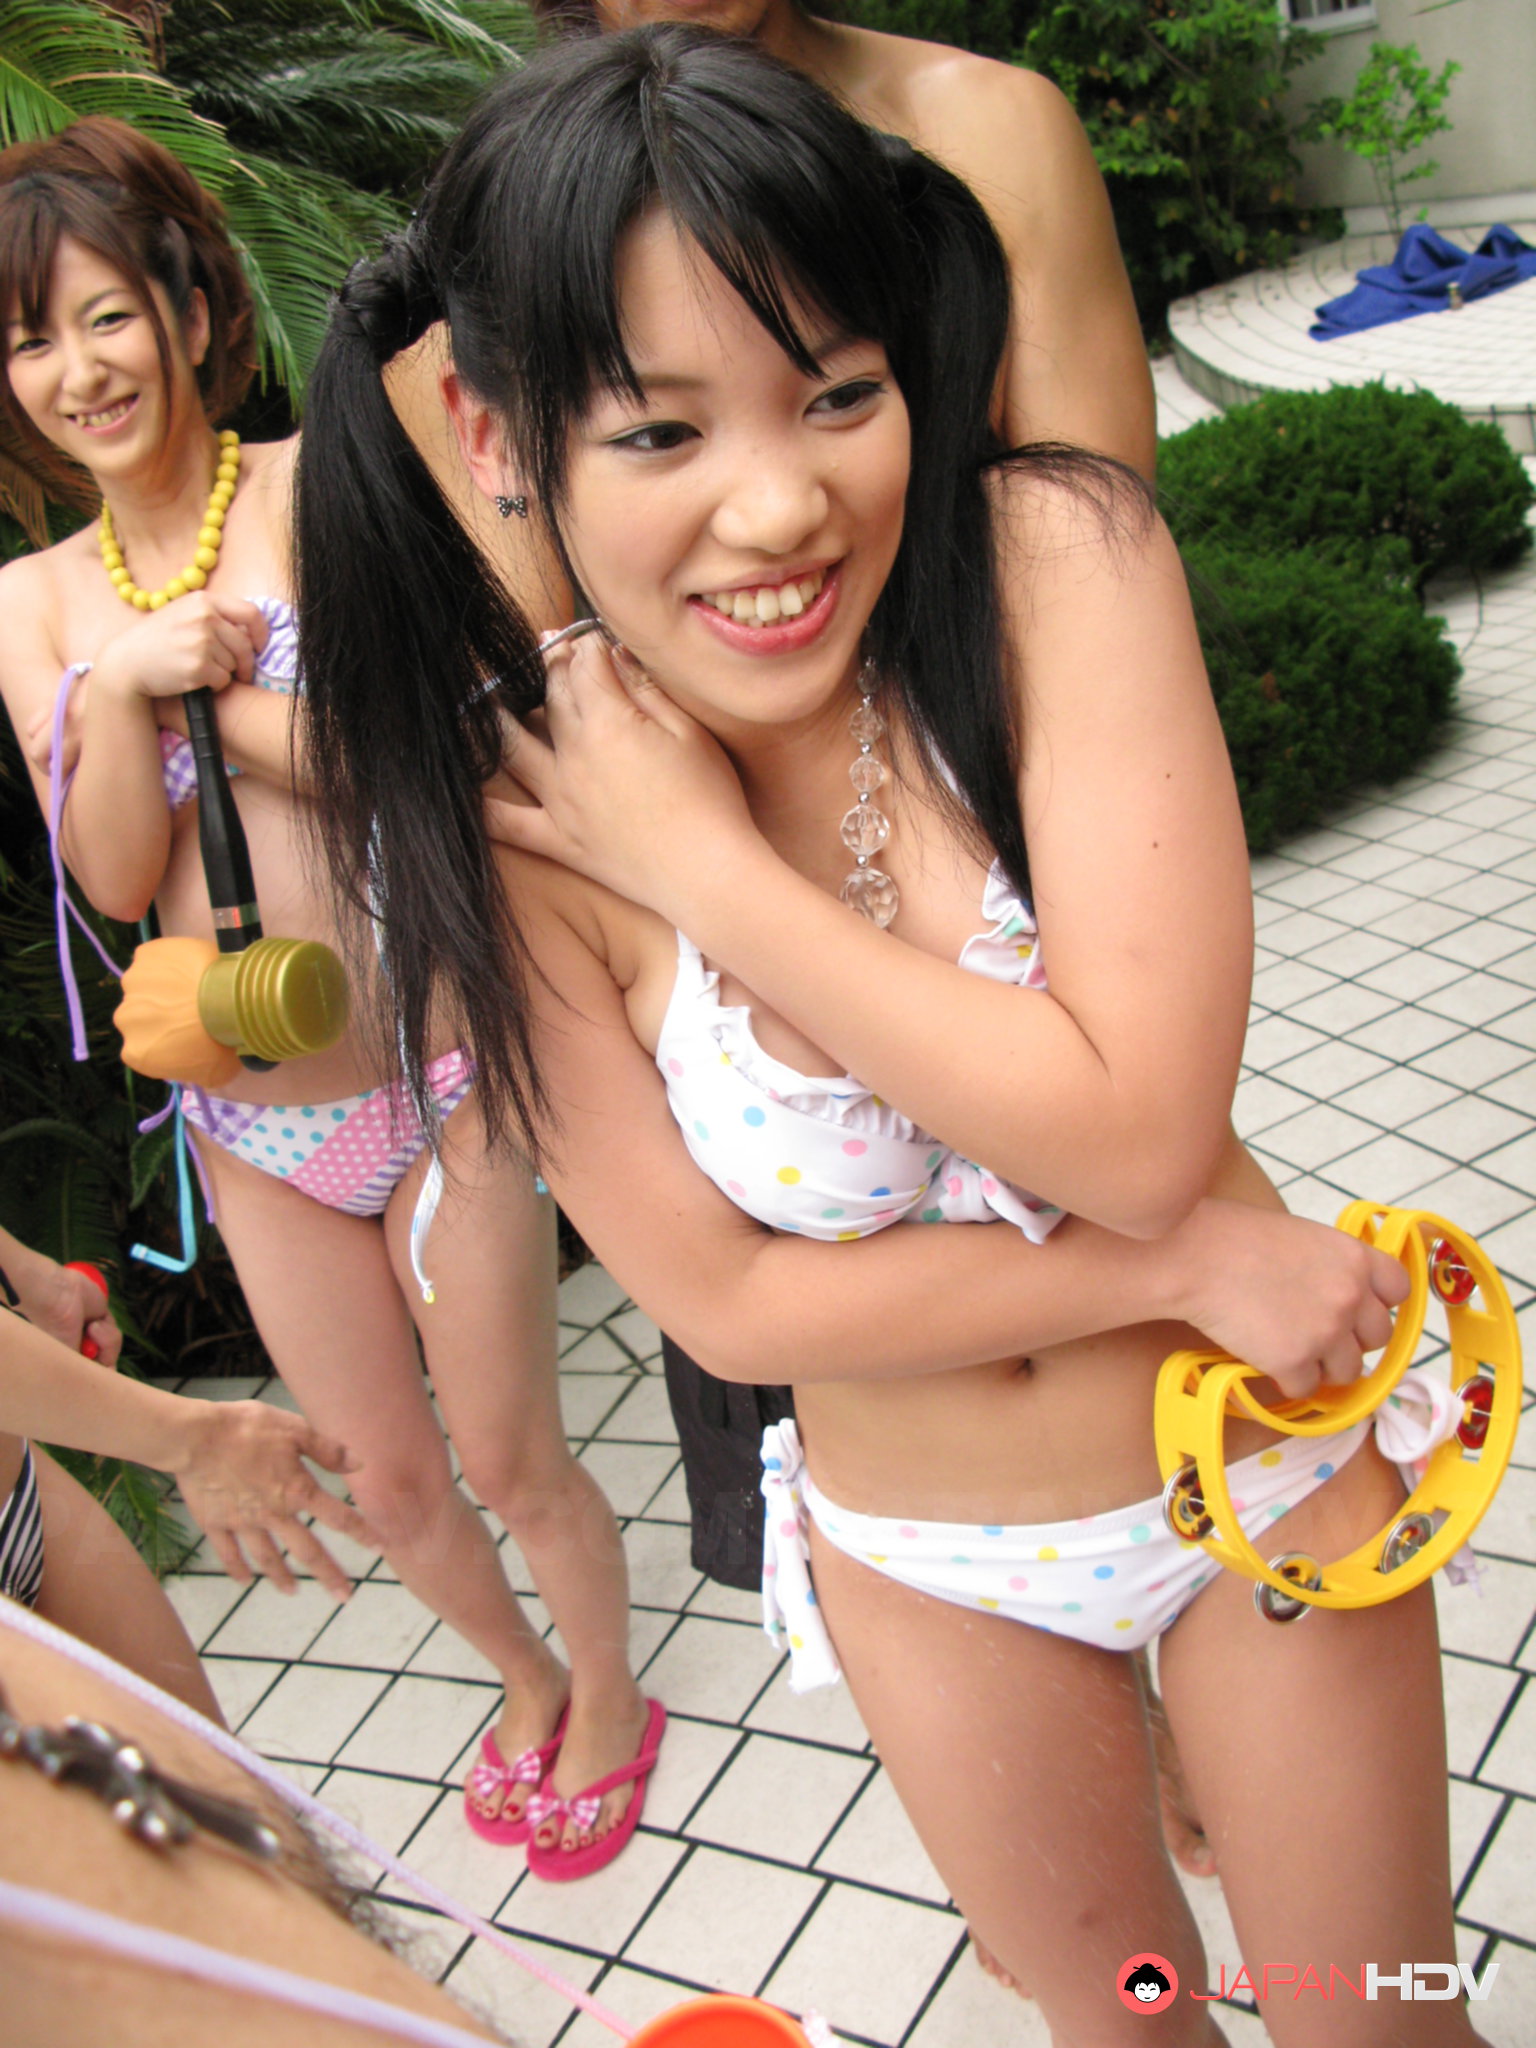 Groupsex Party Horny Japanese Teen